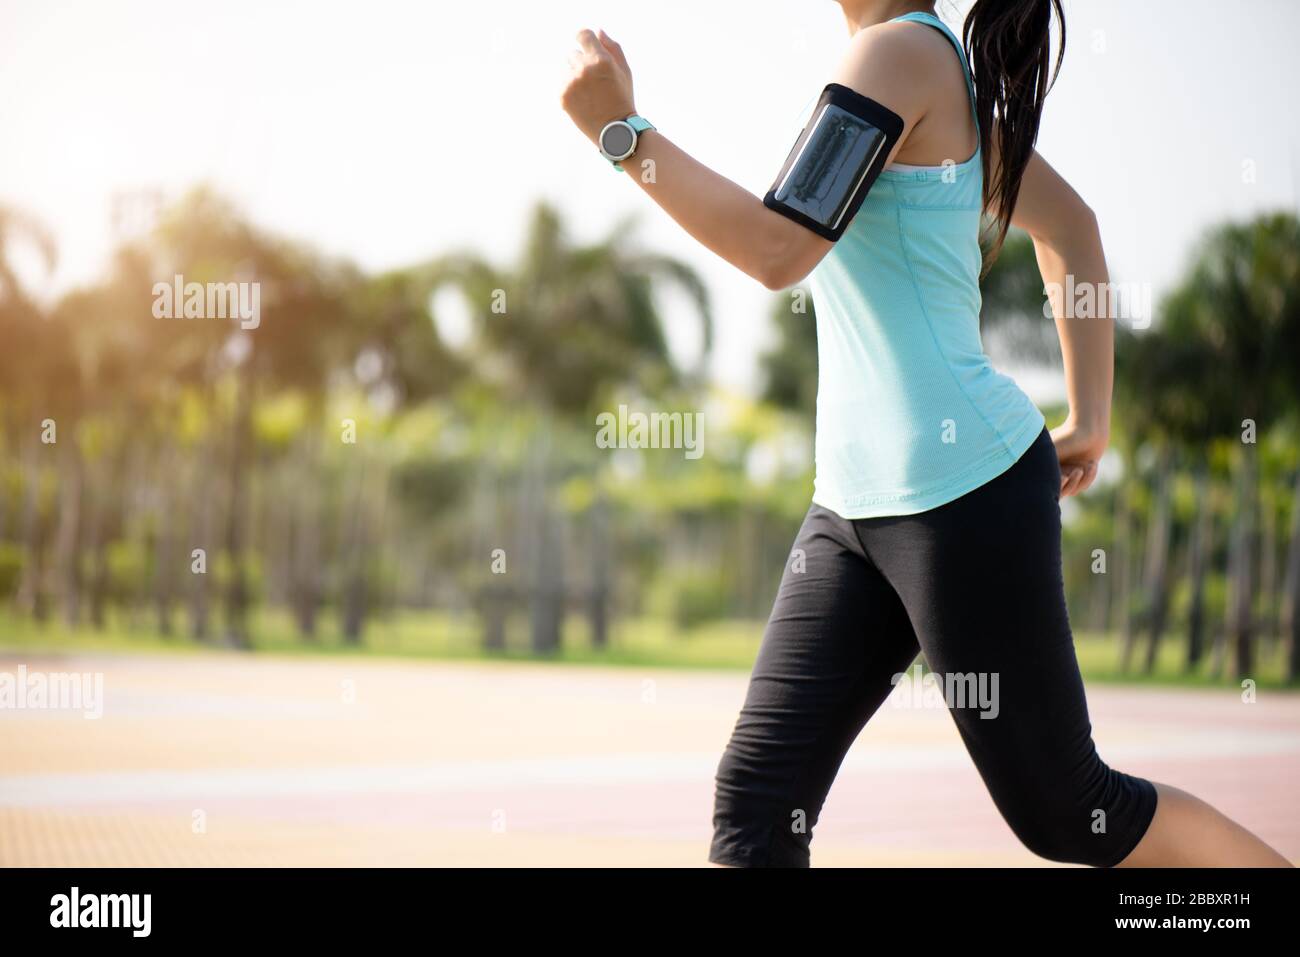 Closeup woman running towards on the road side. Step, run and outdoor exercise activities concept. Stock Photo